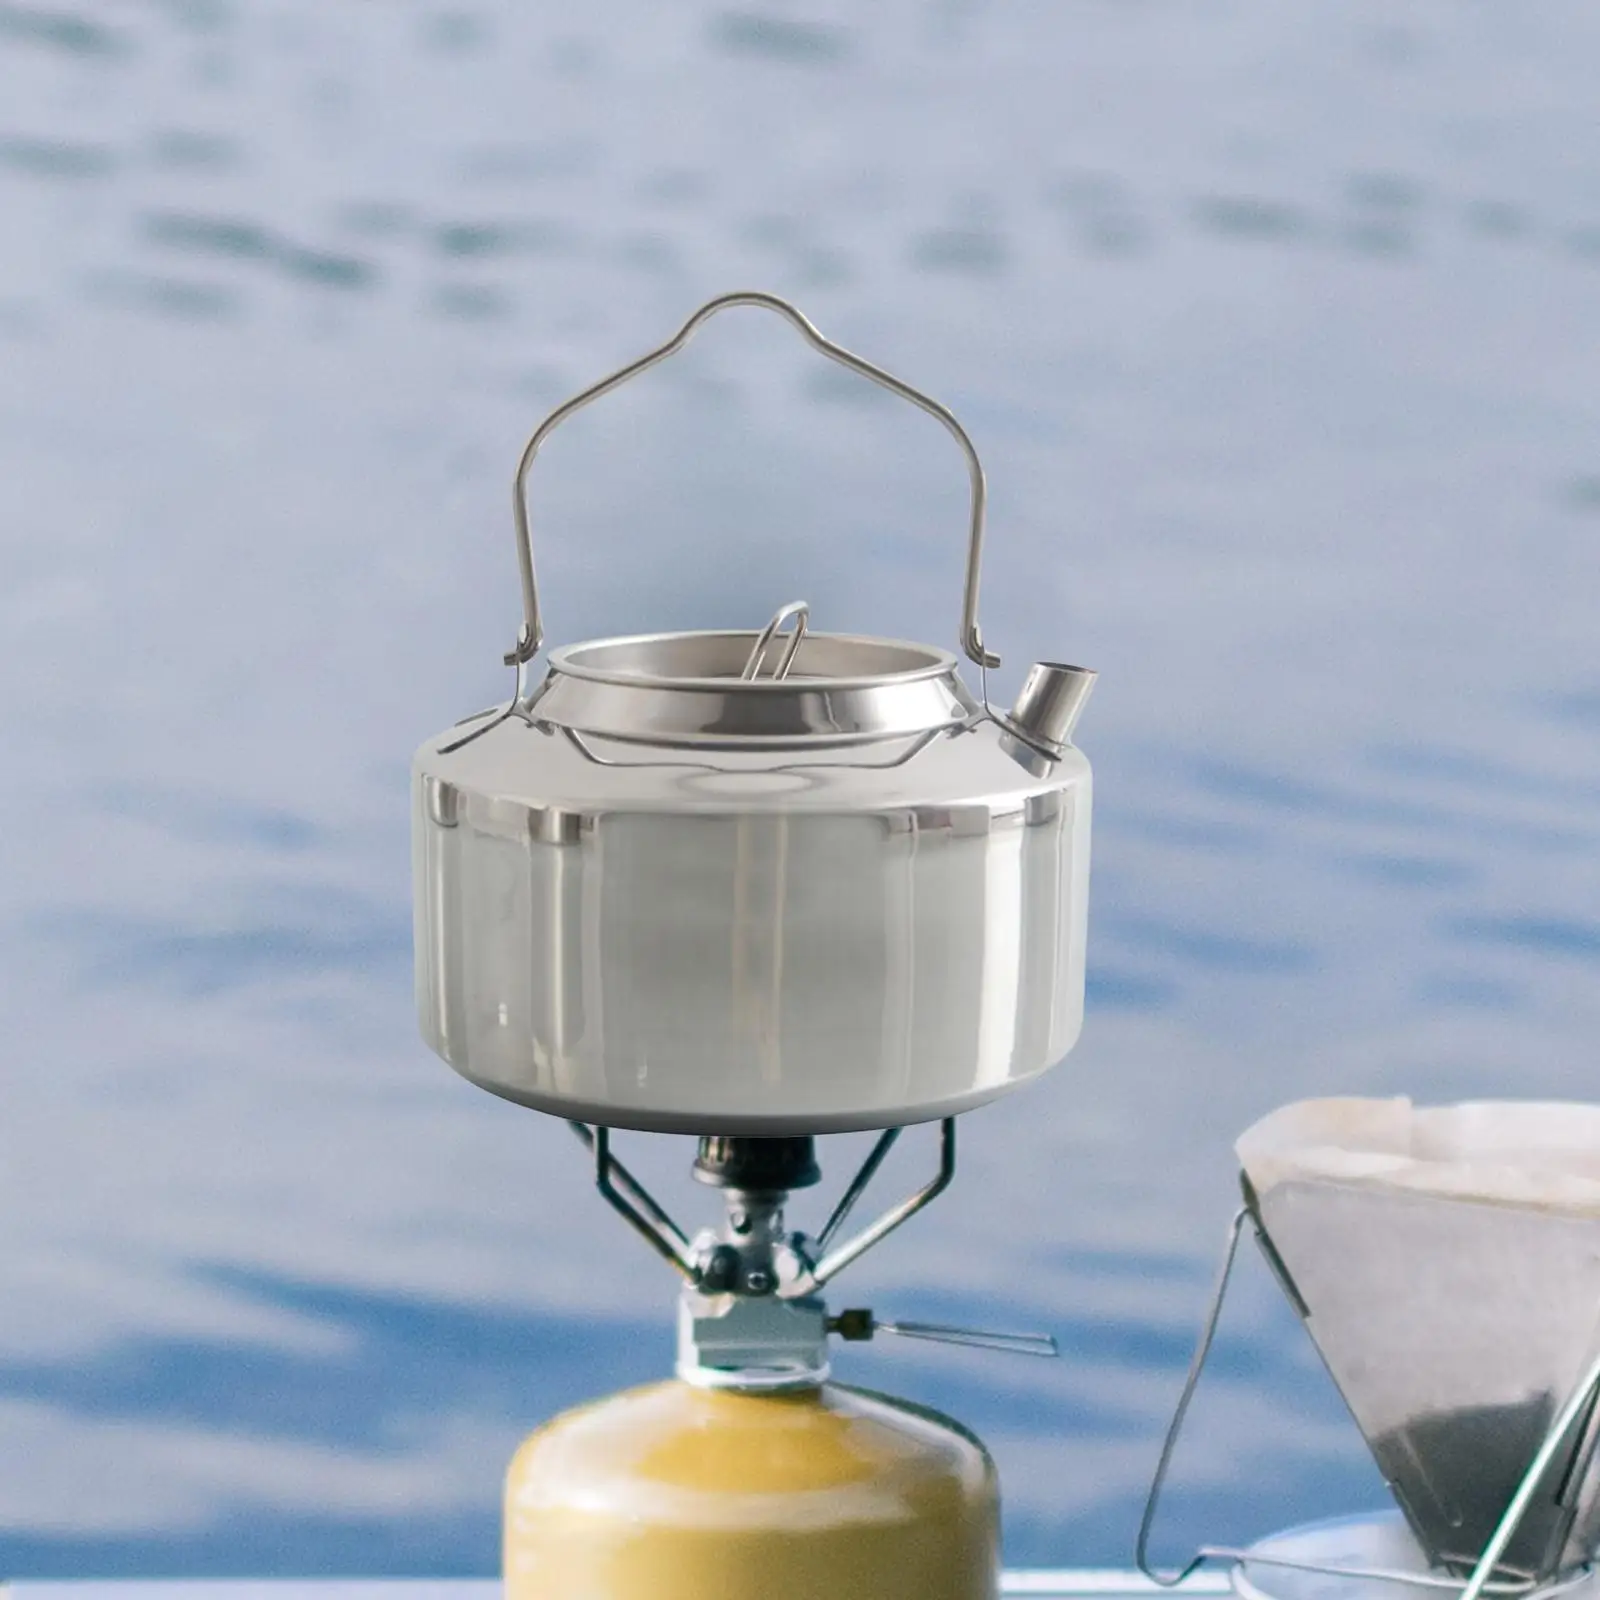 Outdoor Camping Kettle Big Capacity Water Kettle for Picnic Boiling Water